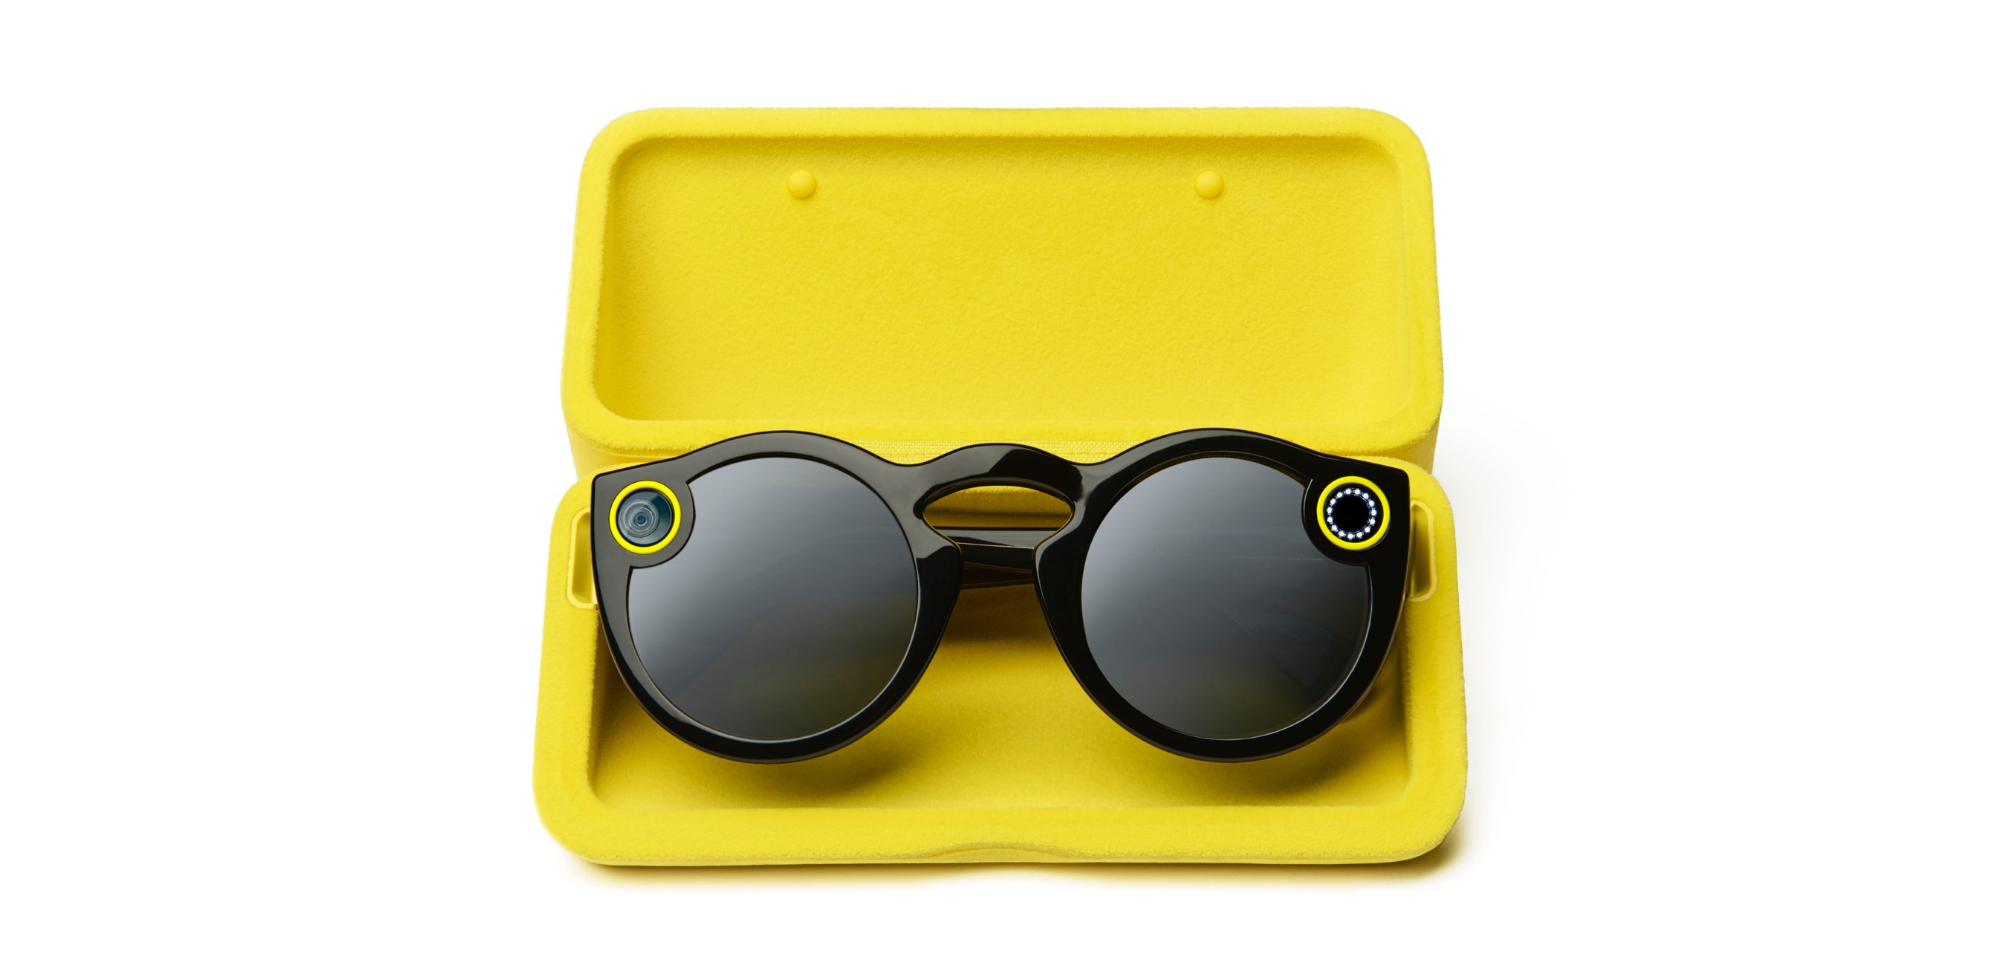 Snapchat Spectacles - Photo Credit: The Verge